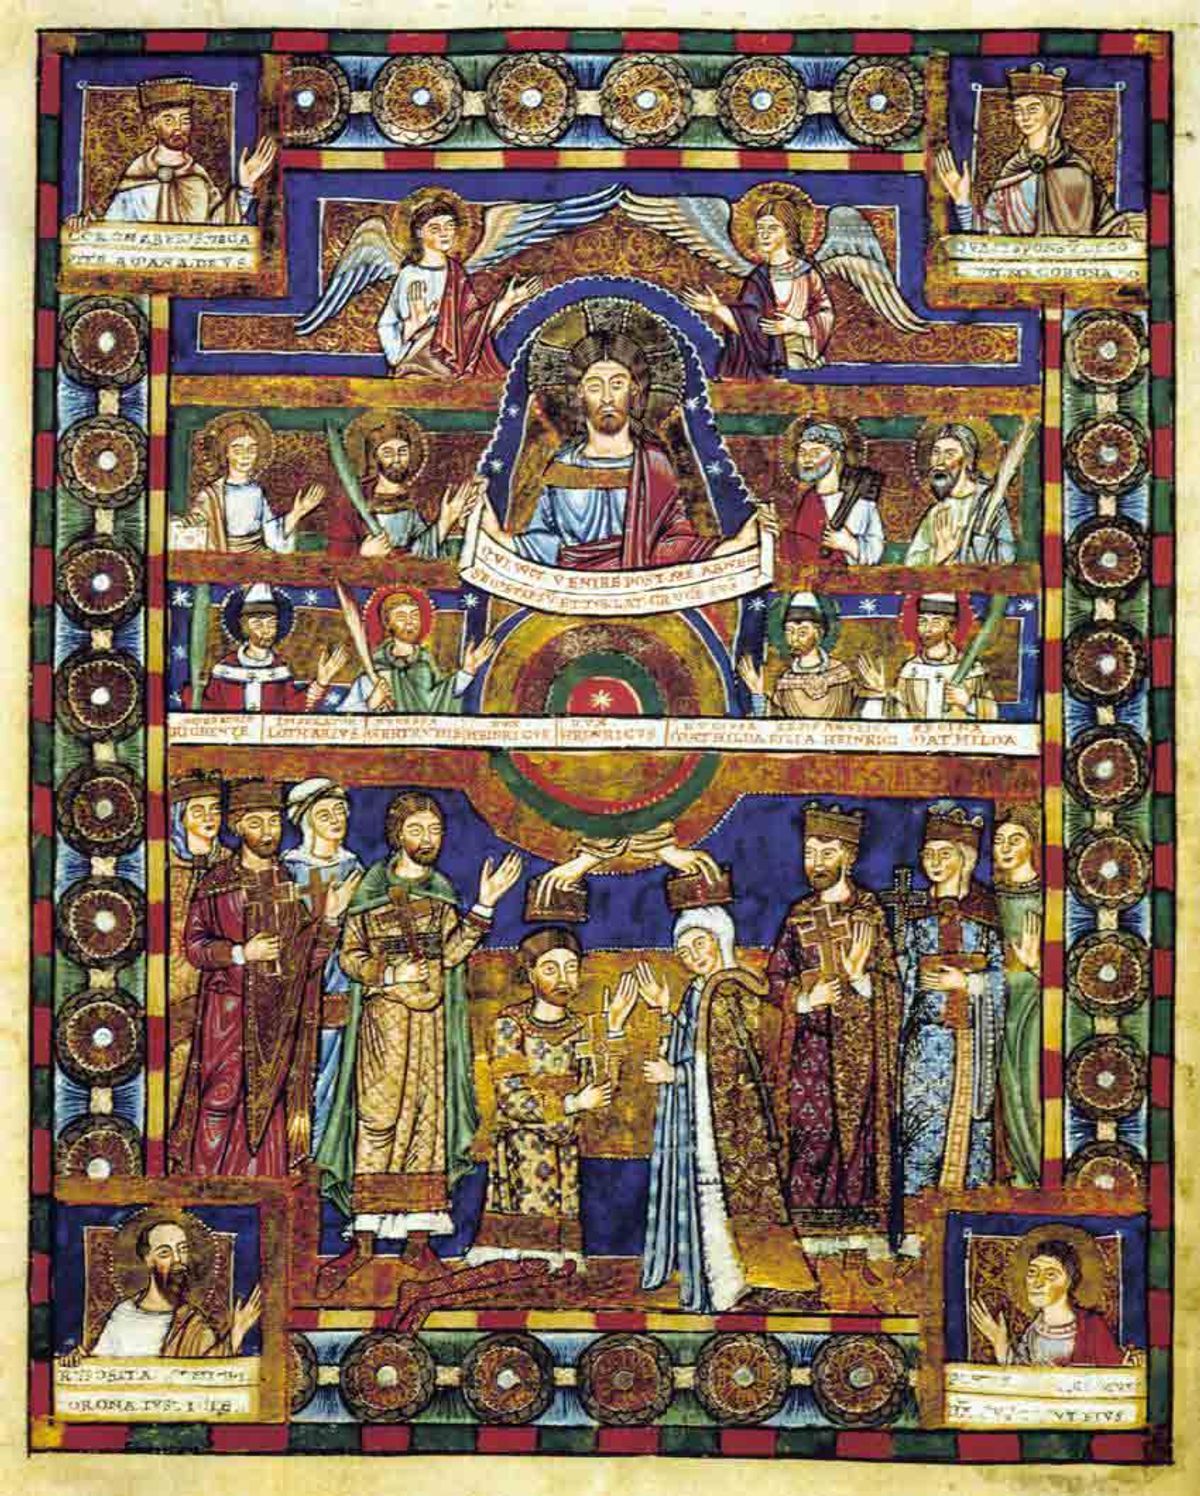 The Coronation Miniature from the Gospels of Henry the Lion (late 12th century) 